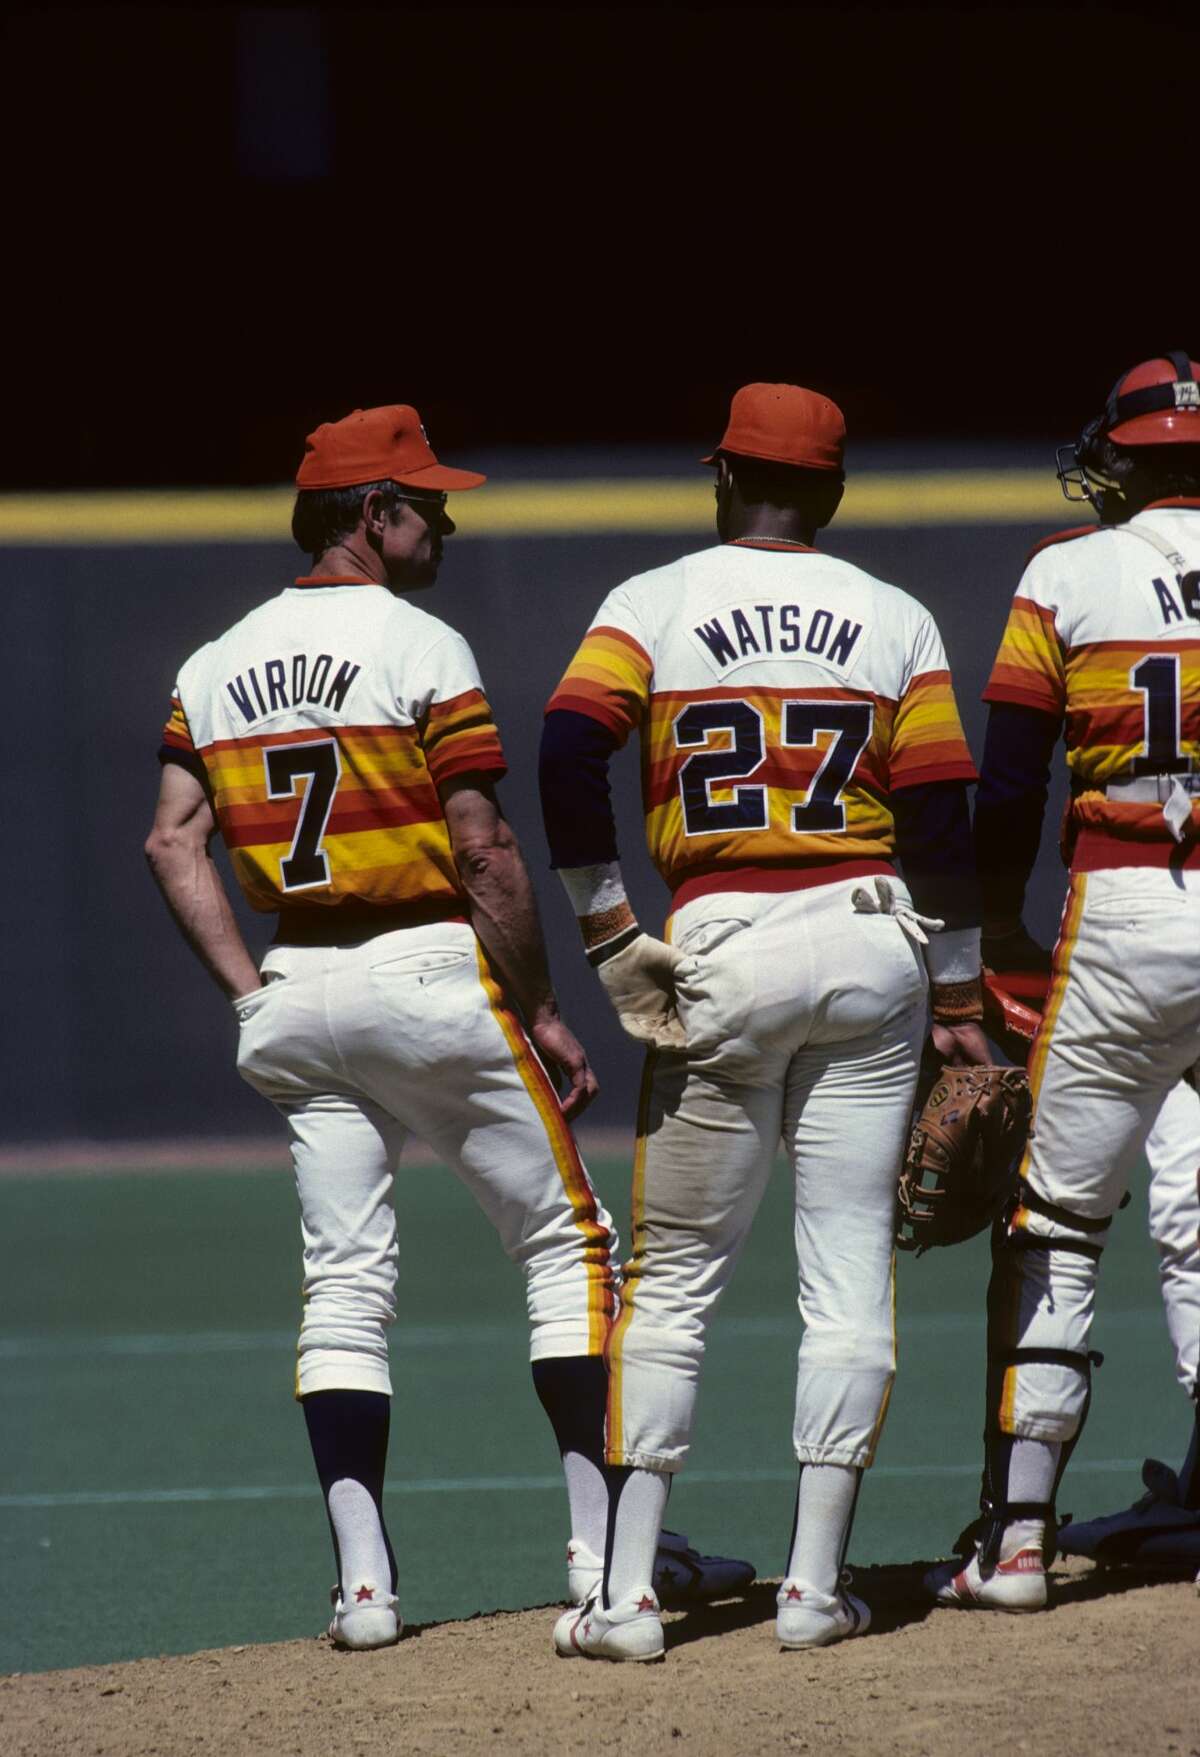 CINCINNATI - MAY 1979: Manager Bill Virdon #7 of the Houston Astros conferences on the mound with first baseman Bob Watson #27 and catcher Alan Ashby during a game in May 1979 between the Astros and the Cincinnati Reds at Riverfront Stadium in Cincinnati, Ohio. (Photo by Diamond Images/Getty Images)